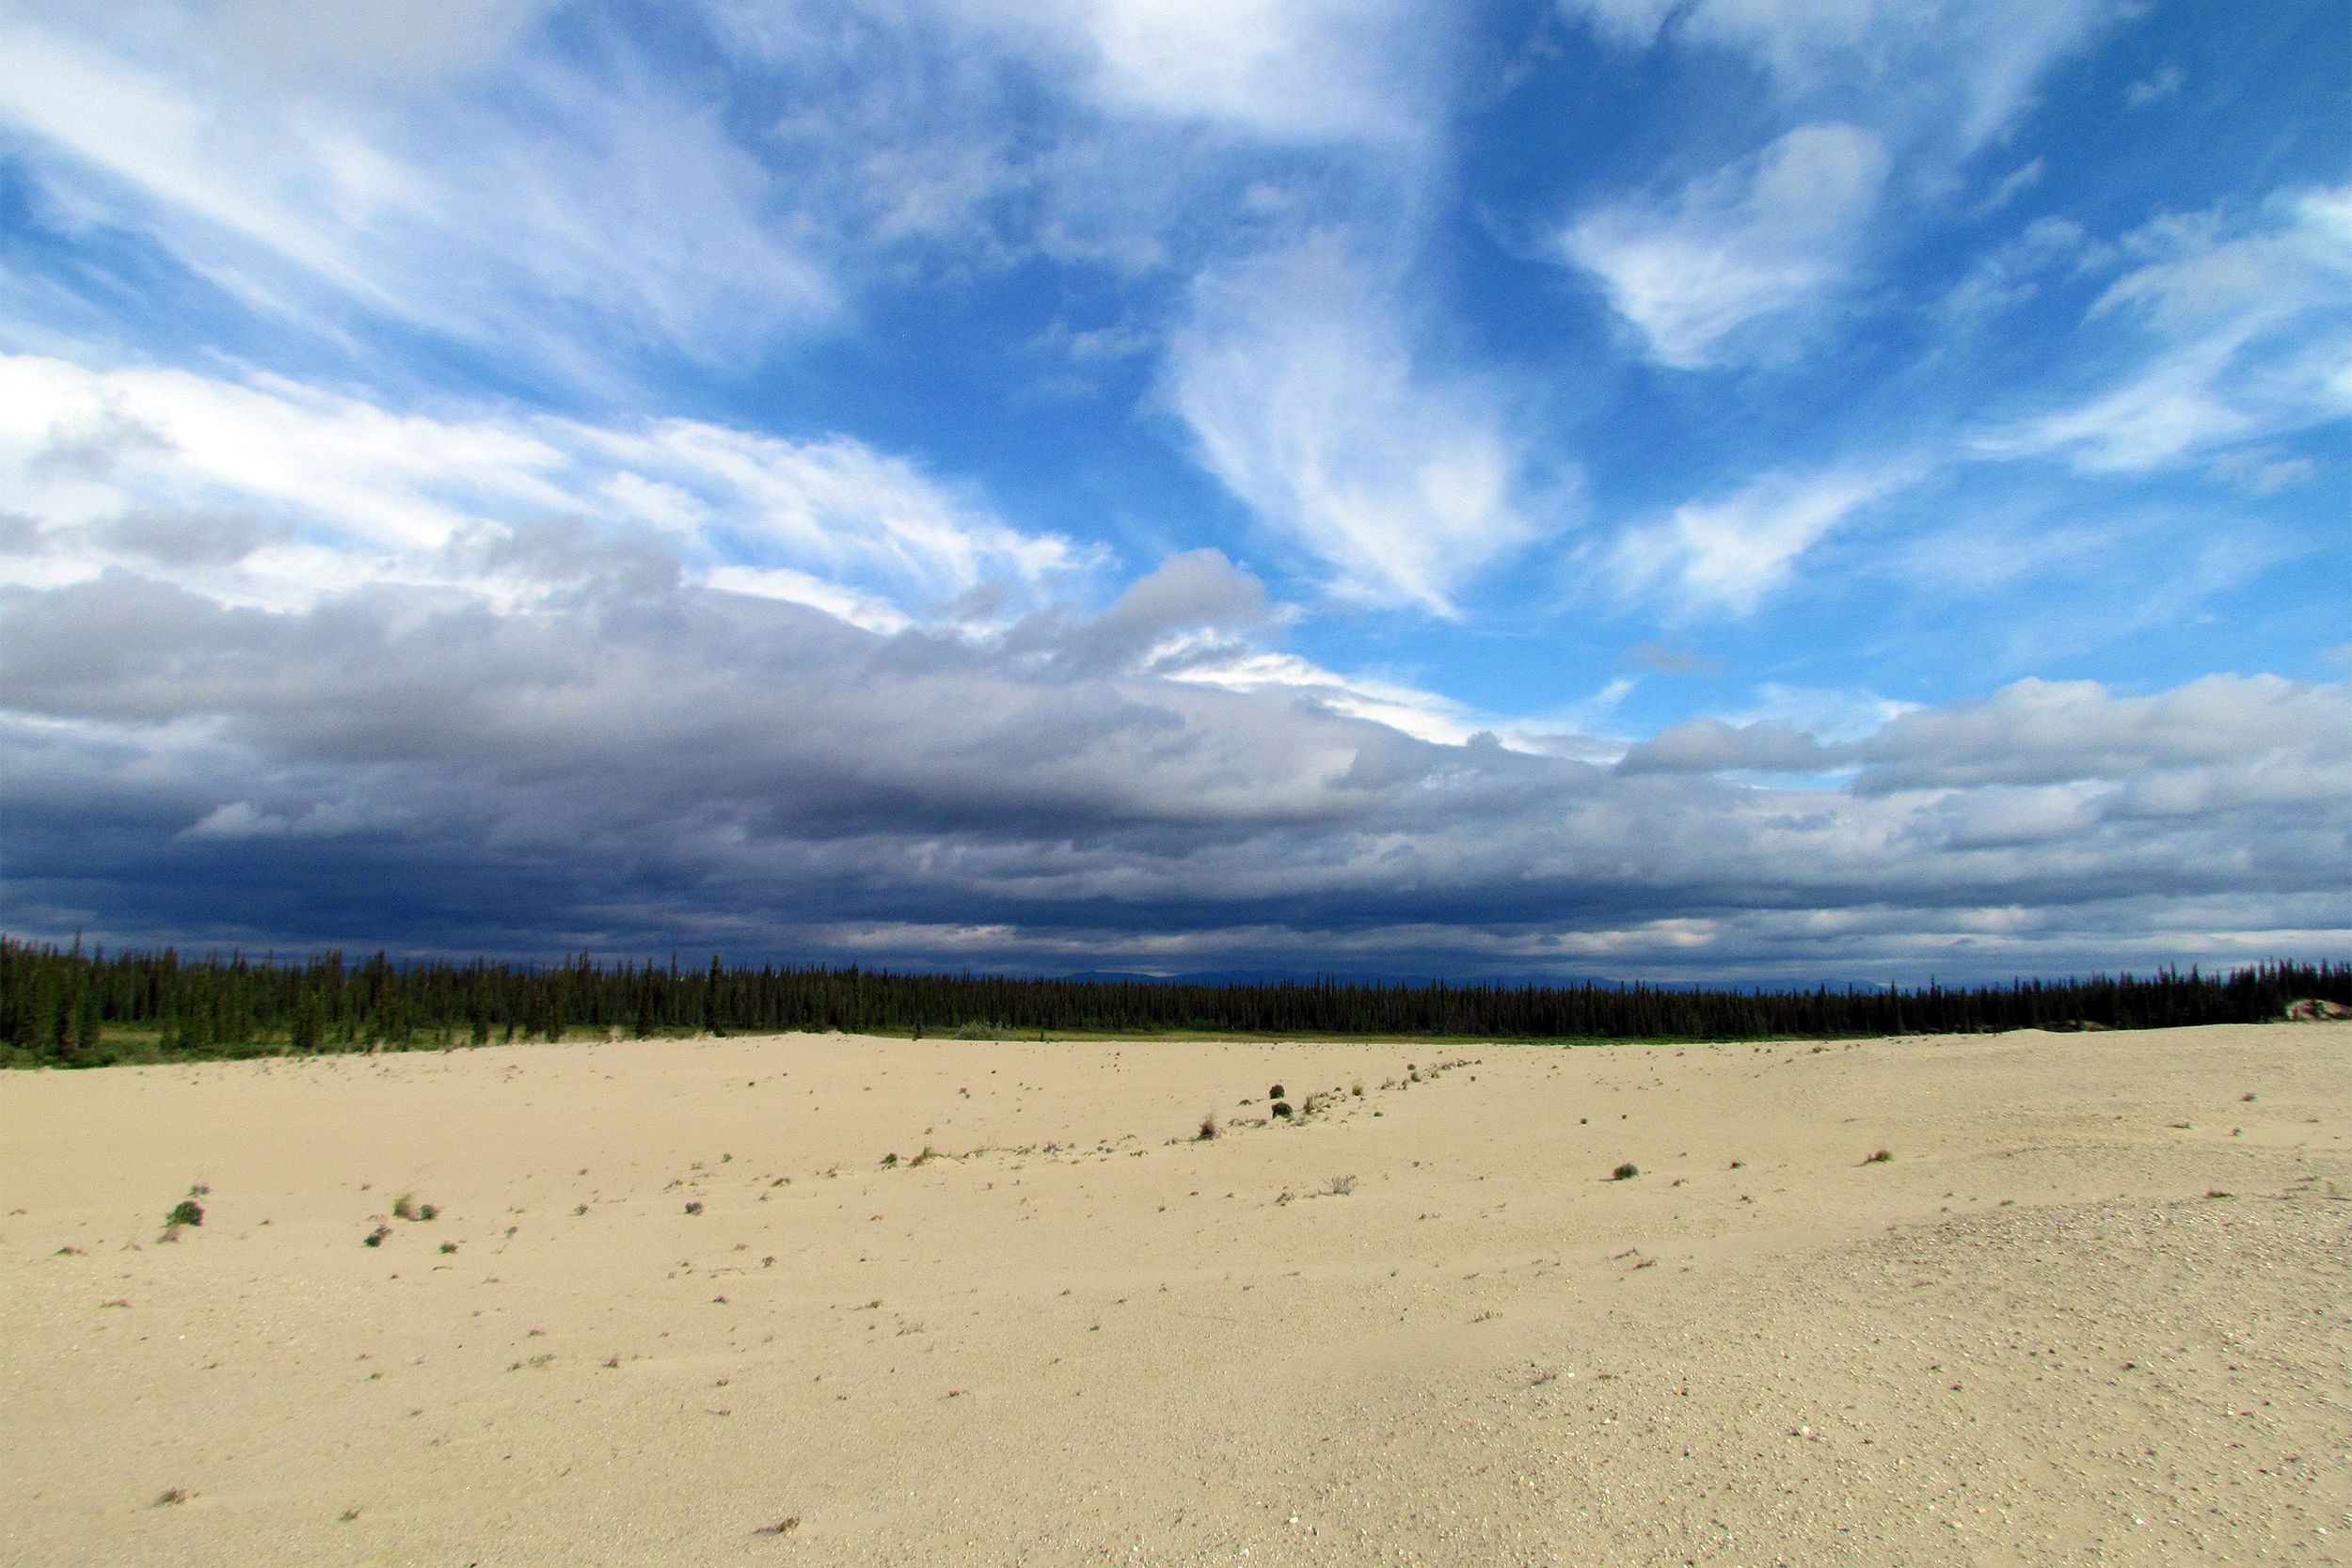 Twice a year, nearly a half-million caribou pass through the Great Kobuk region. <a href="https://www.nps.gov/kova/index.htm">Kobuk Valley National Park</a> includes the Kobuk River, the Great Kobuk Sand Dunes, and the Little Kobuk and Hunt River dunes.